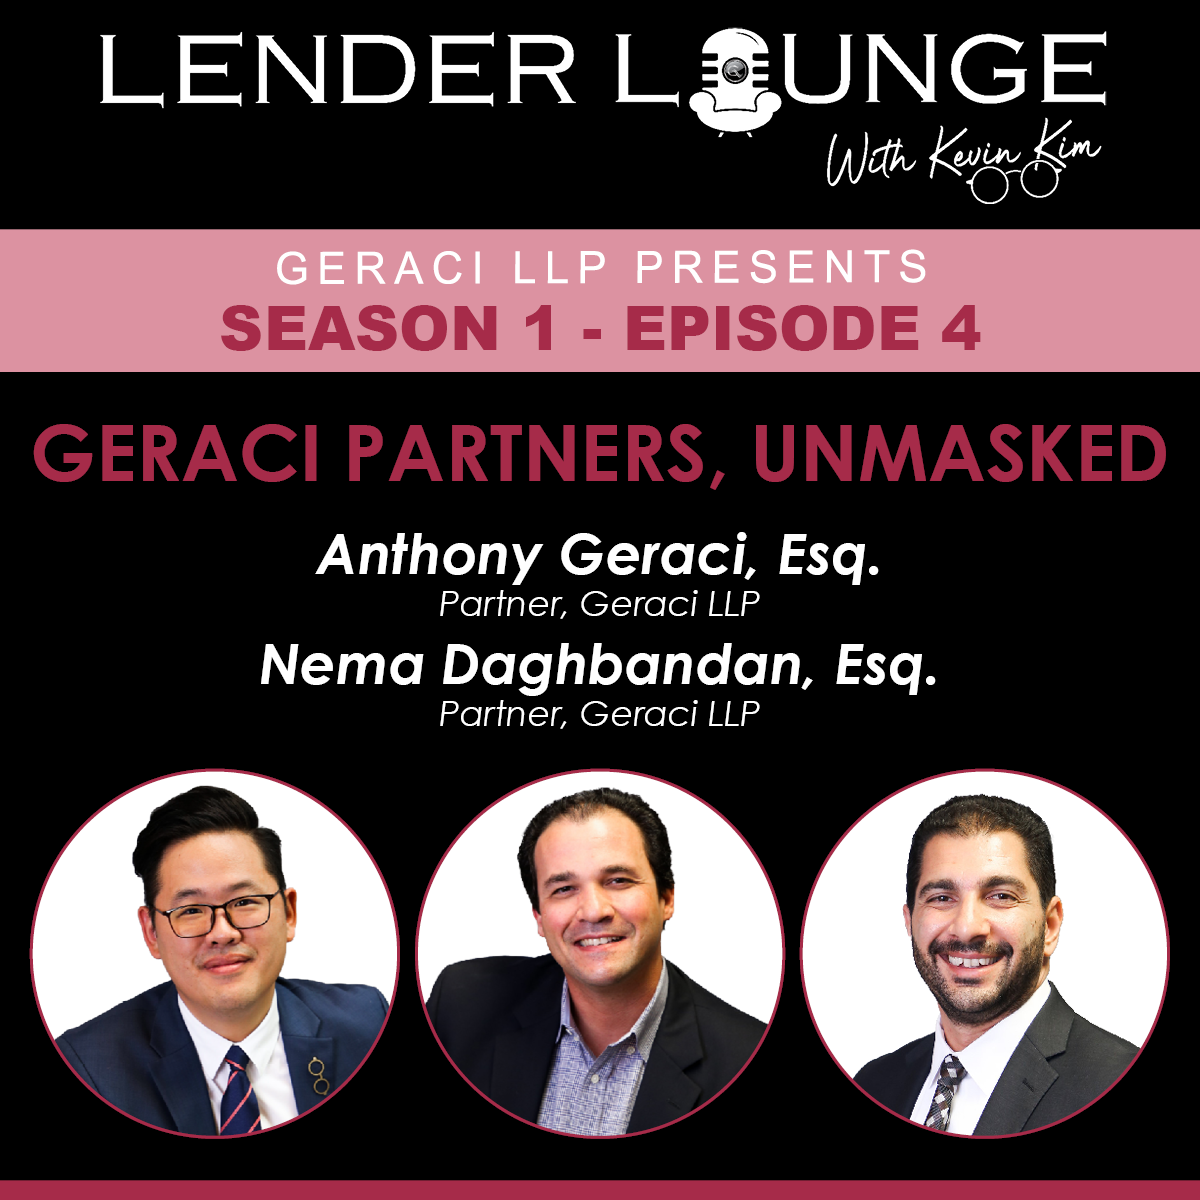 lender-lounge-with-kevin-kim-geraci-partners